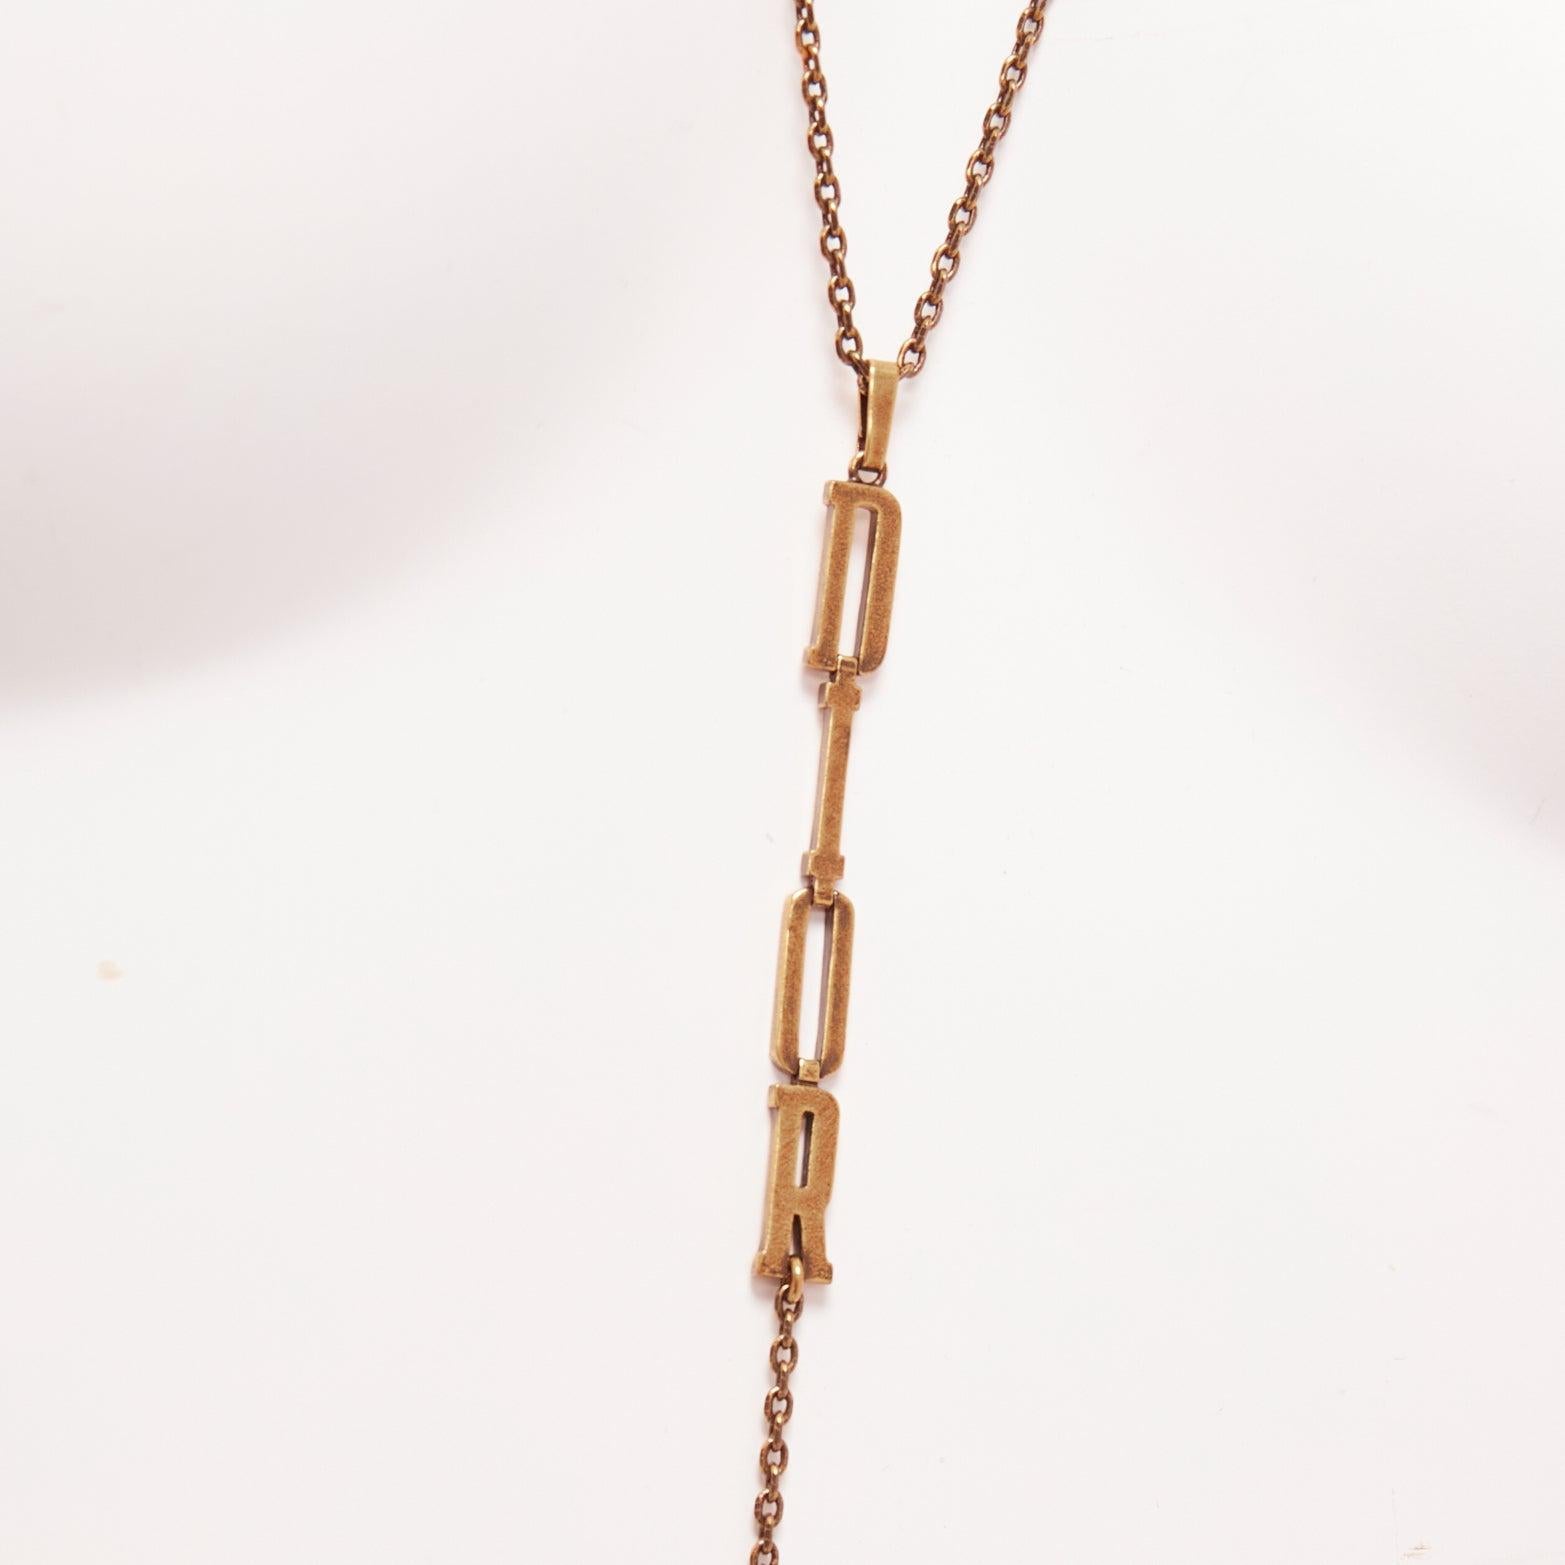 DIOR antique gold vertical logo chain CD star charm tiered necklace
Reference: AAWC/A00917
Brand: Dior
Designer: Maria Grazia Chiuri
Material: Metal
Color: Bronze
Pattern: Solid
Closure: Lobster Clasp
Lining: Bronze Metal
Extra Details: CD and star